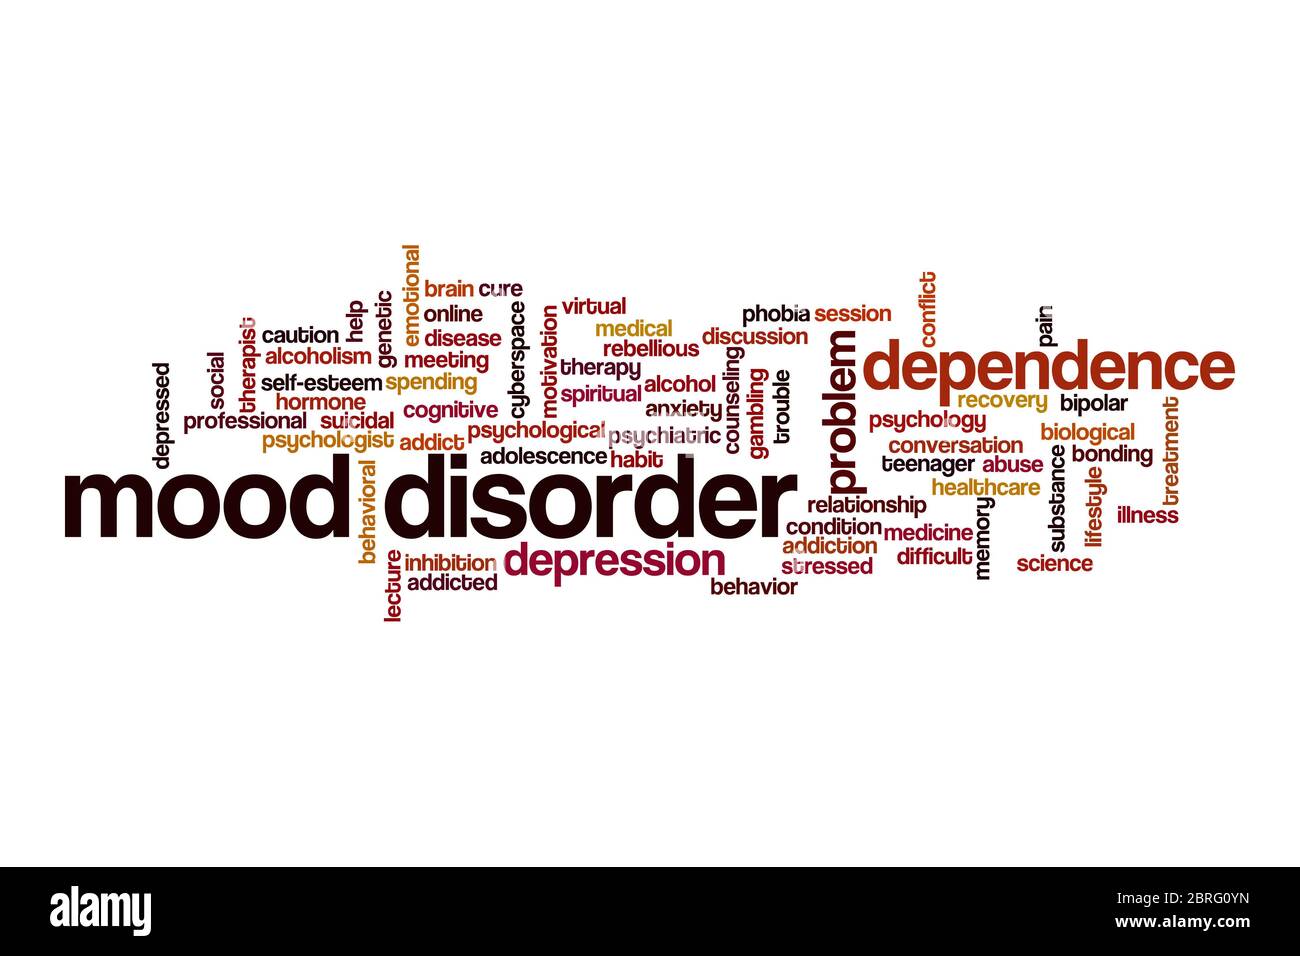 Mood disorder cloud concept on white background Stock Photo